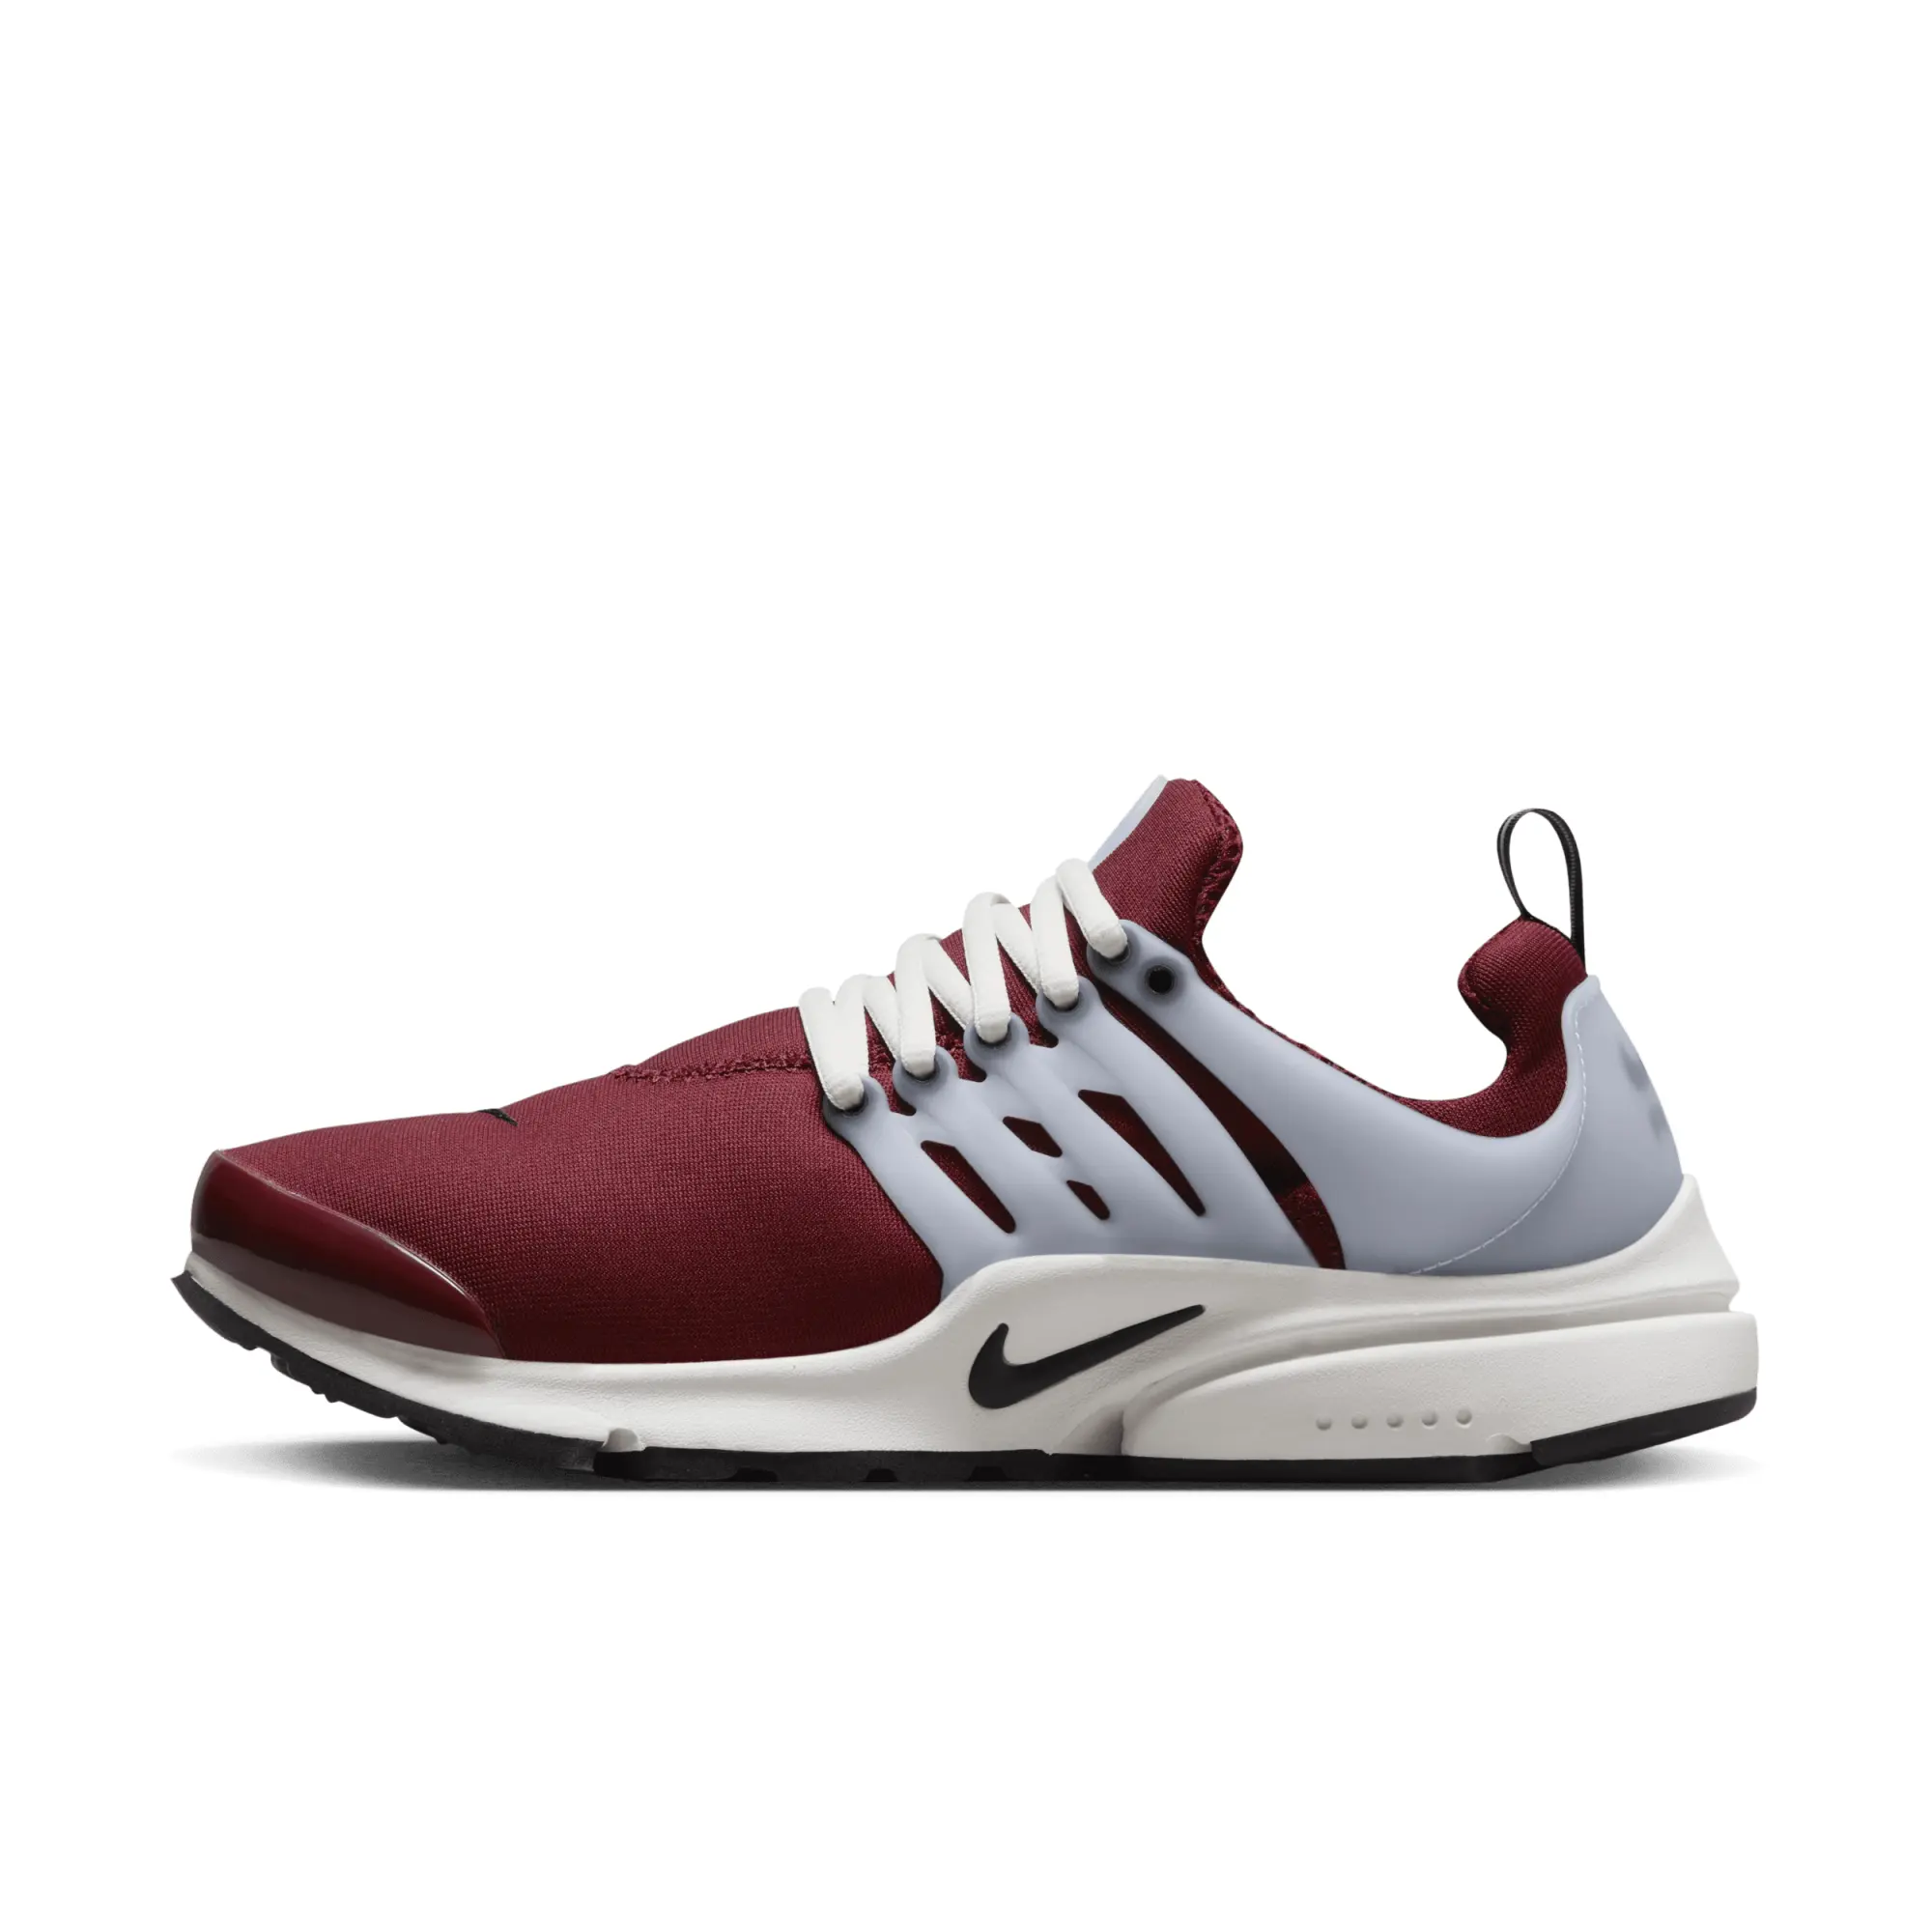 Nike Air Presto Men's Shoes - Red